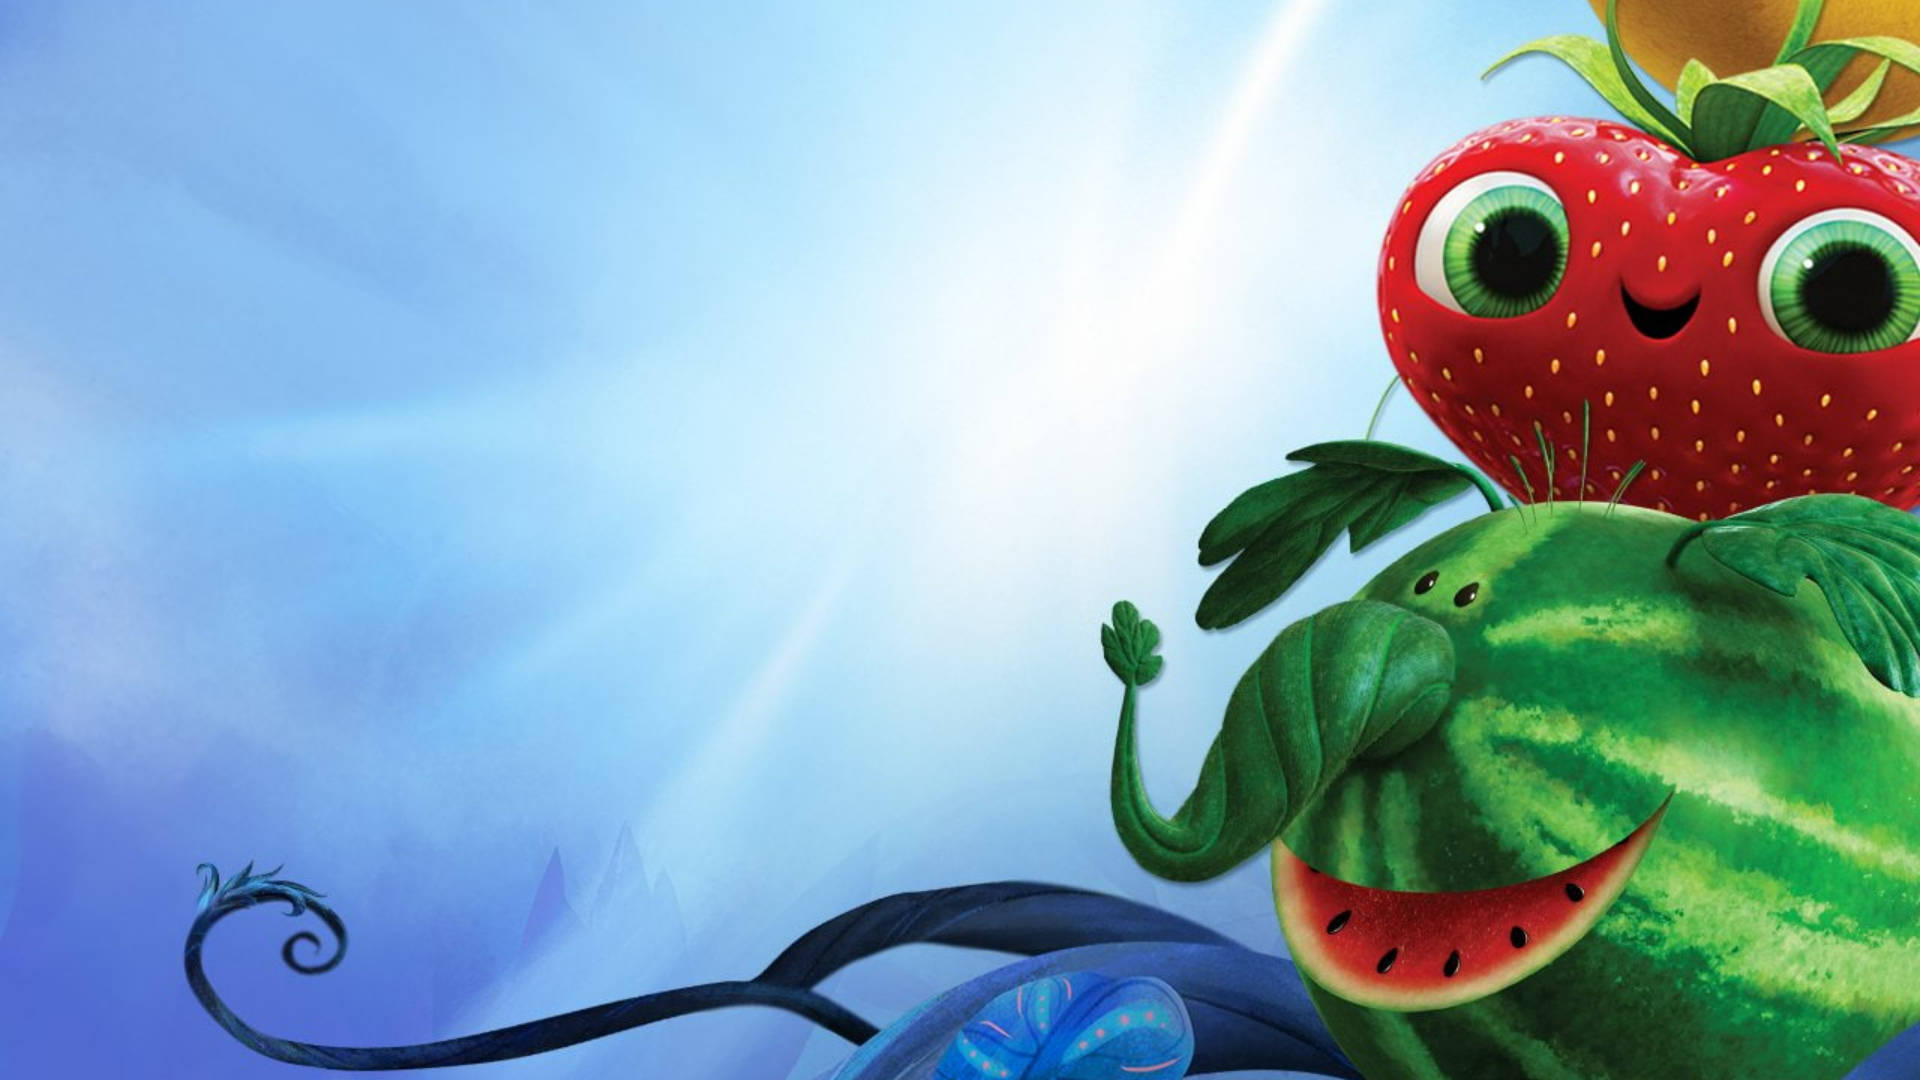 Cloudy With A Chance Of Meatballs 2 Watermelophant With Barry Wallpaper